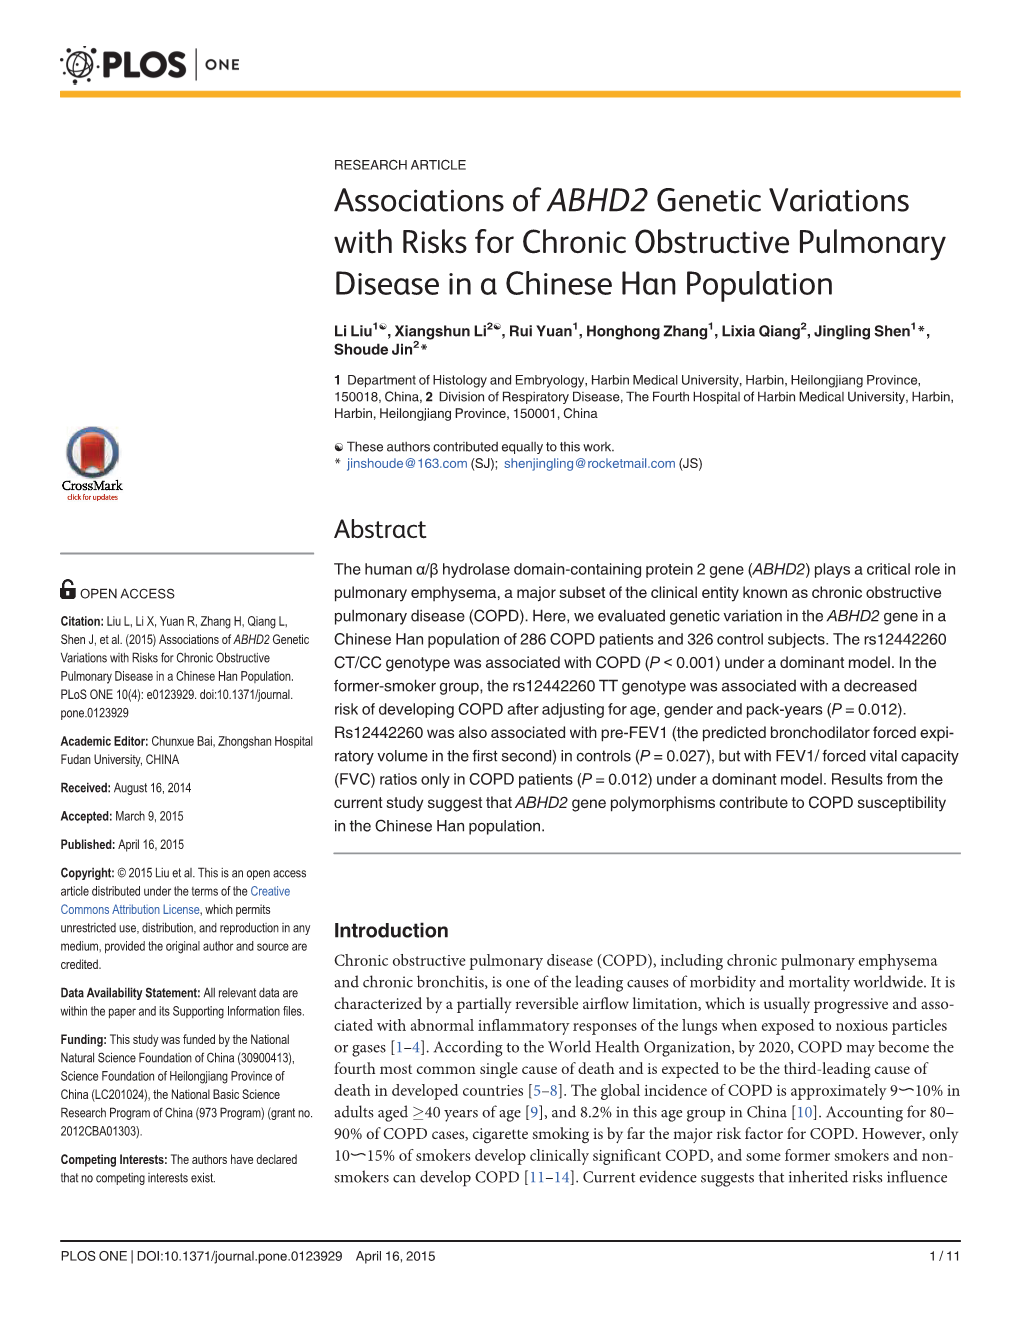 Associations of ABHD2 Genetic Variations with Risks for Chronic Obstructive Pulmonary Disease in a Chinese Han Population